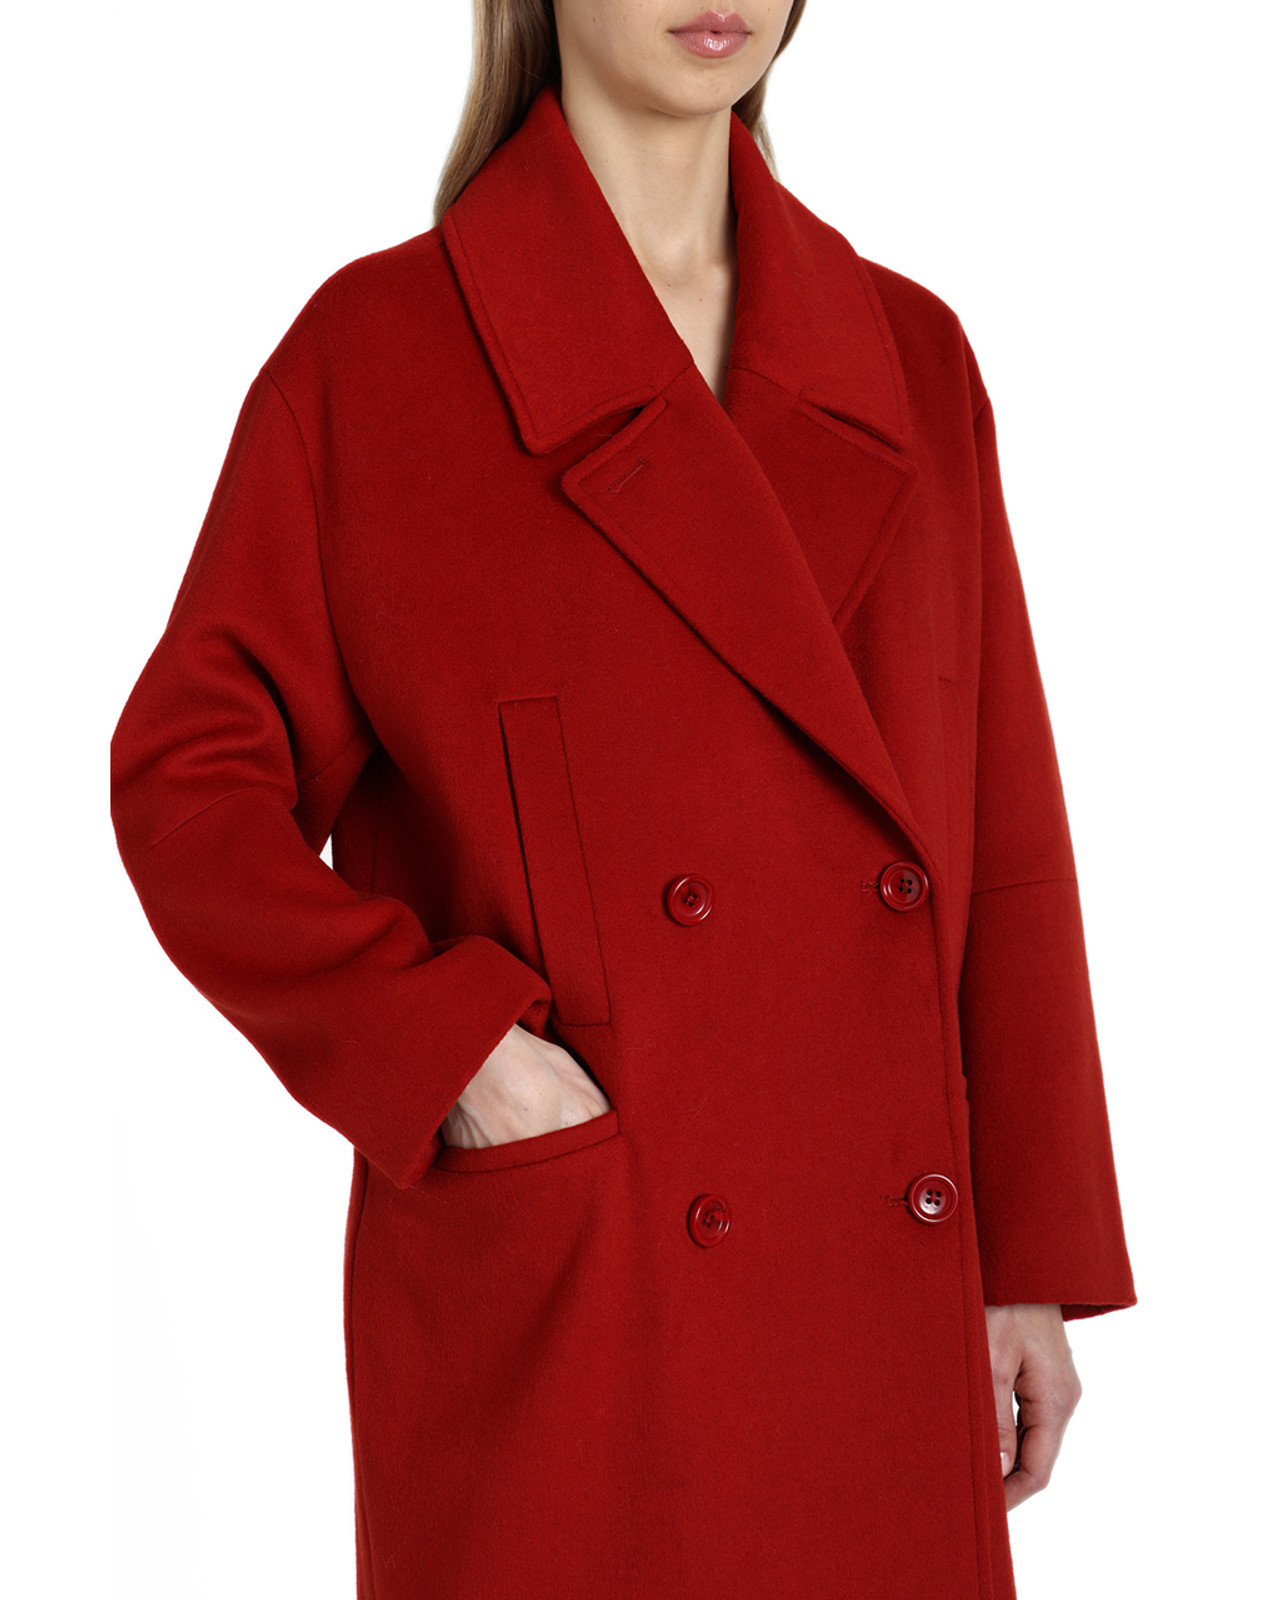 Cameron Double Double Breasted Wool Coat by Badgley Mischka